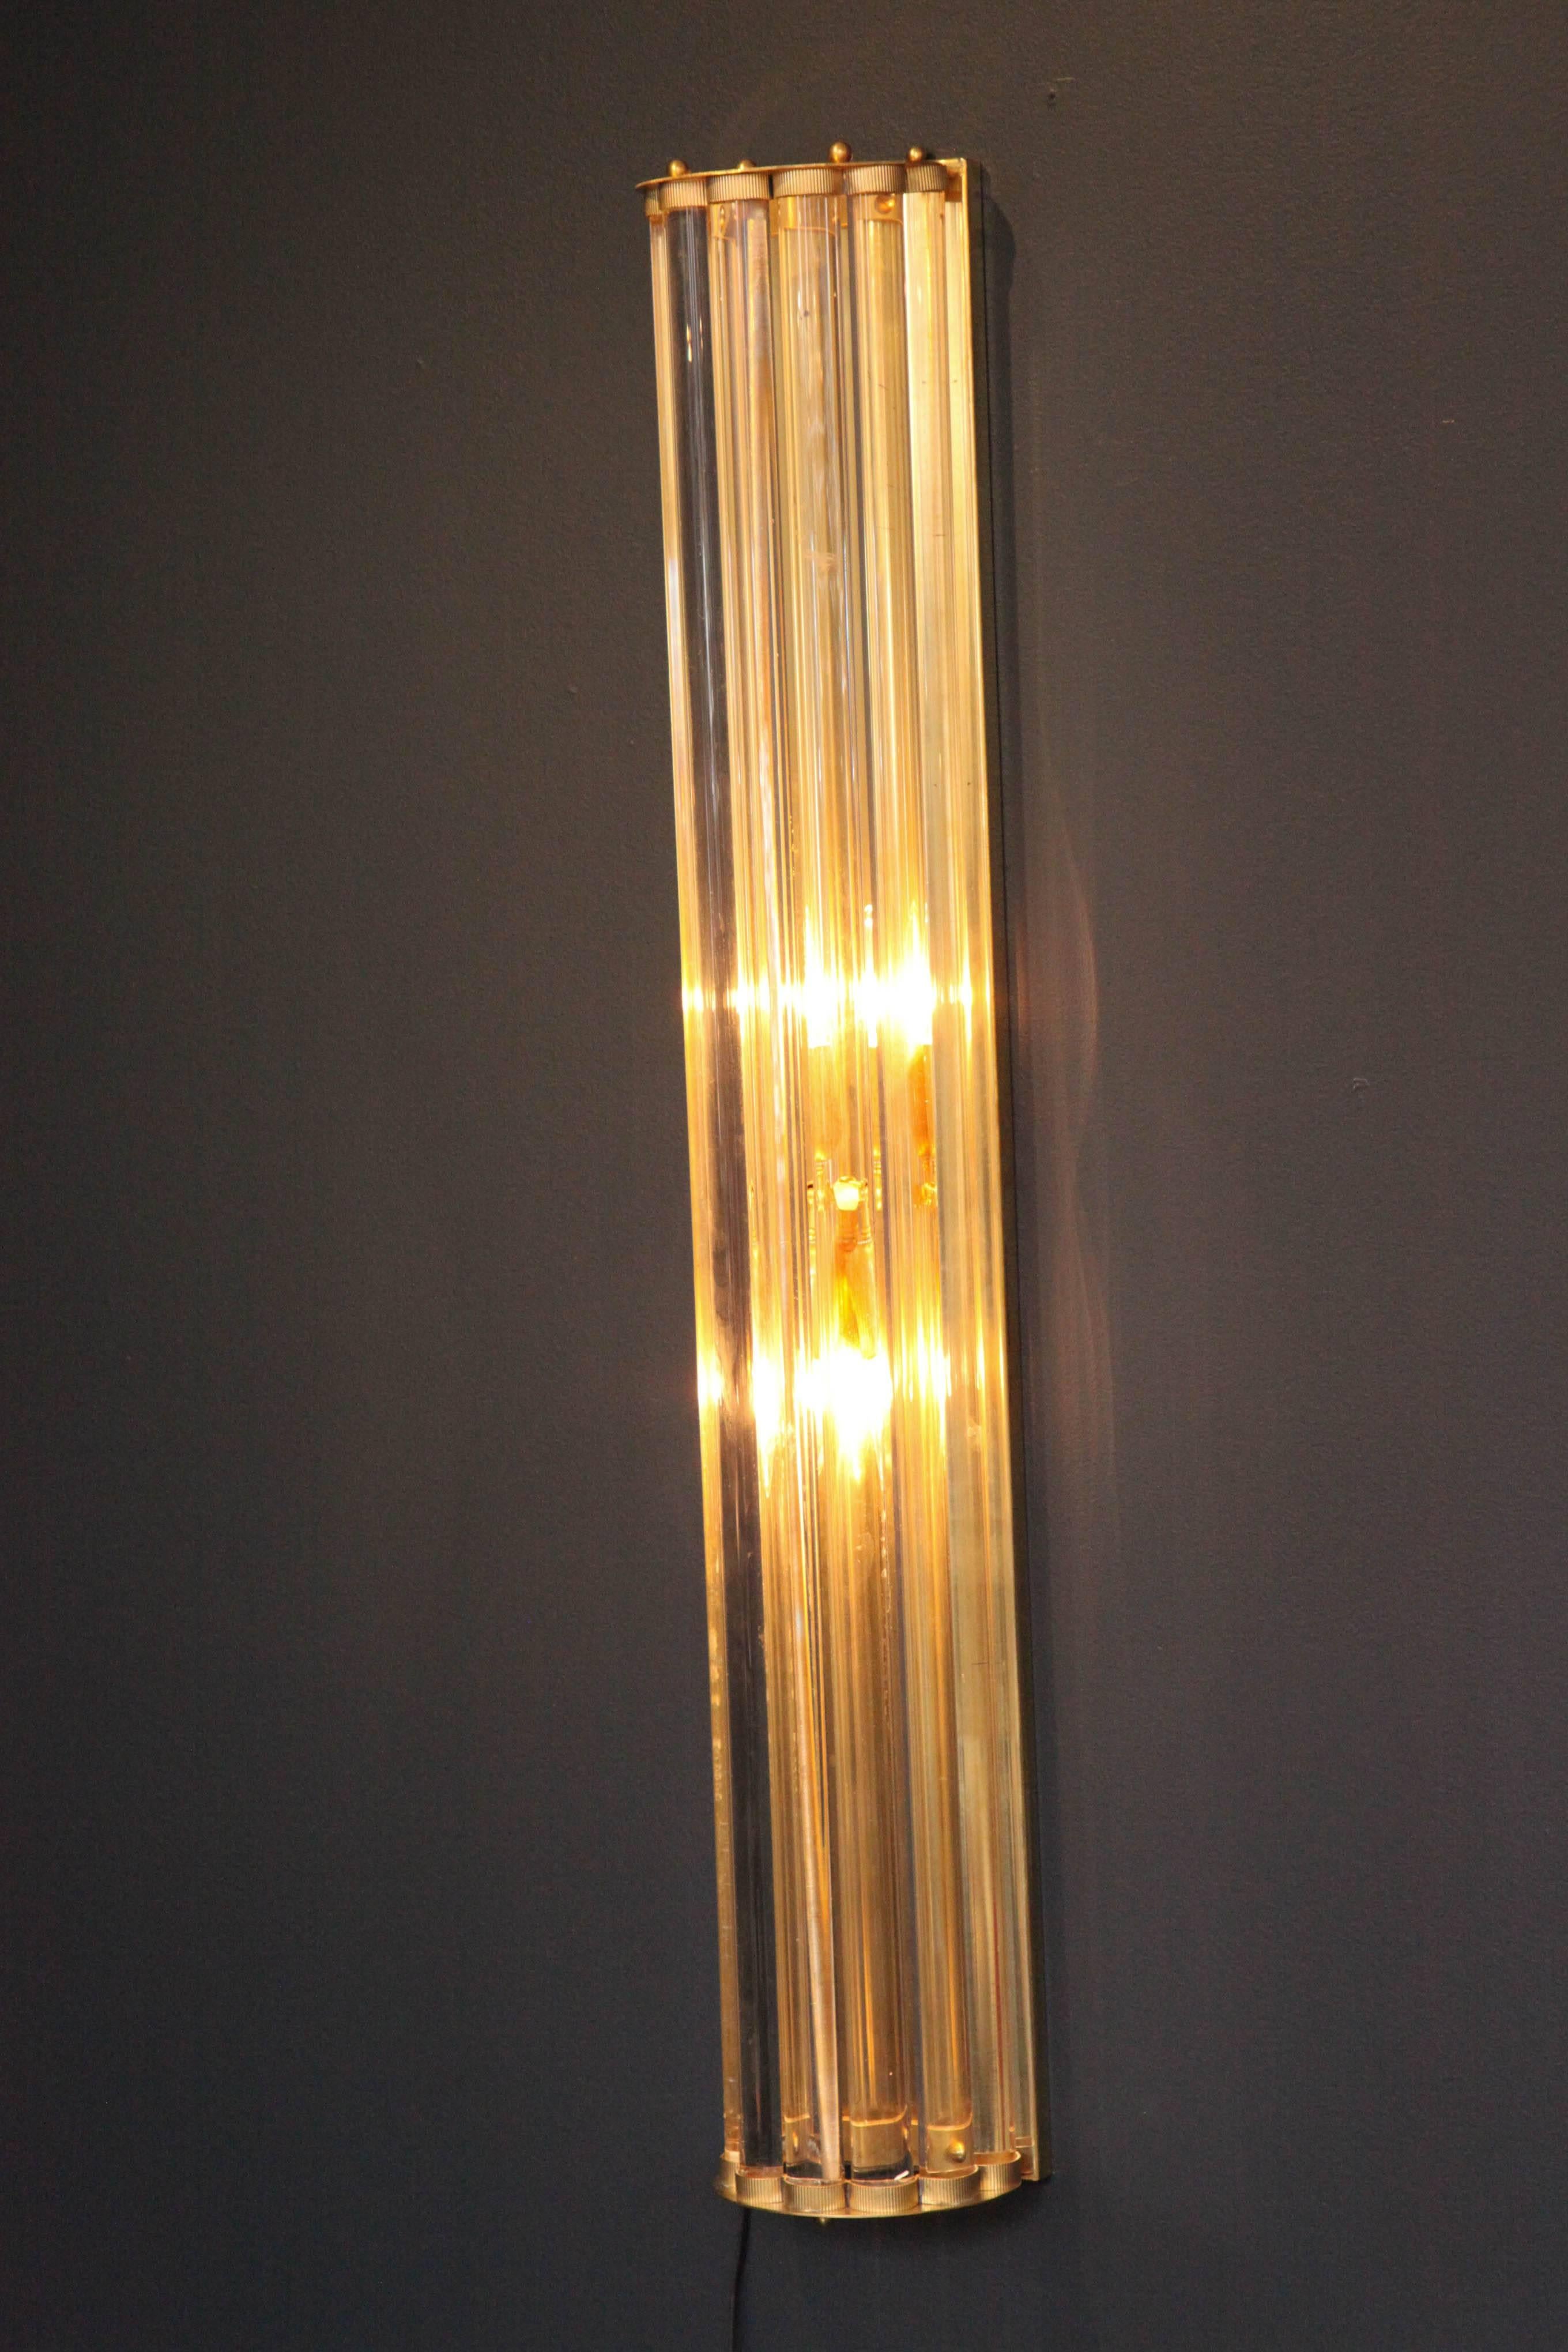 Elegant and classic.  This pair of hand made sconces are comprised of long solid clear Murano glass rods attached to a minimalistic but heavy brass frame.  Light illuminates from within the glass.  Wired for U.S. and ready to hang.

This pair of